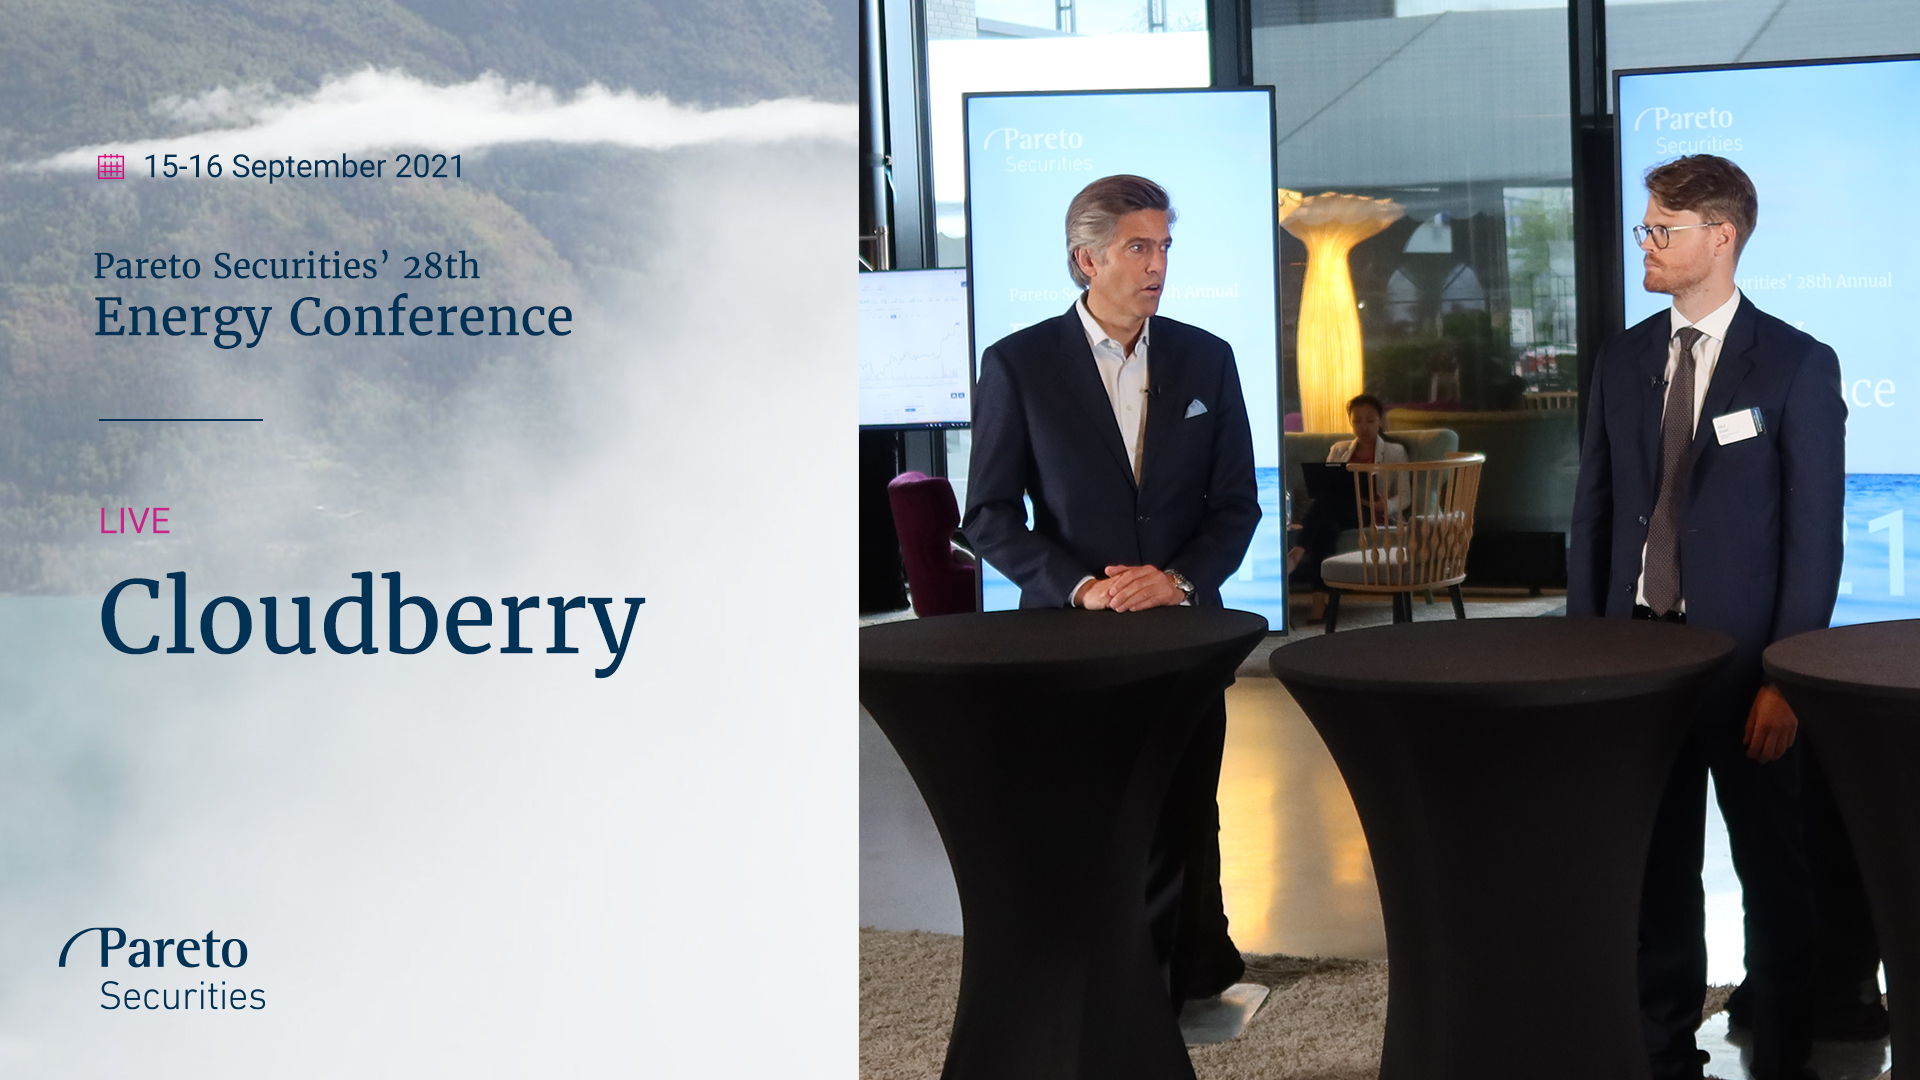 Cloudberry: Live från Pareto Securities’ 28th Energy Conference